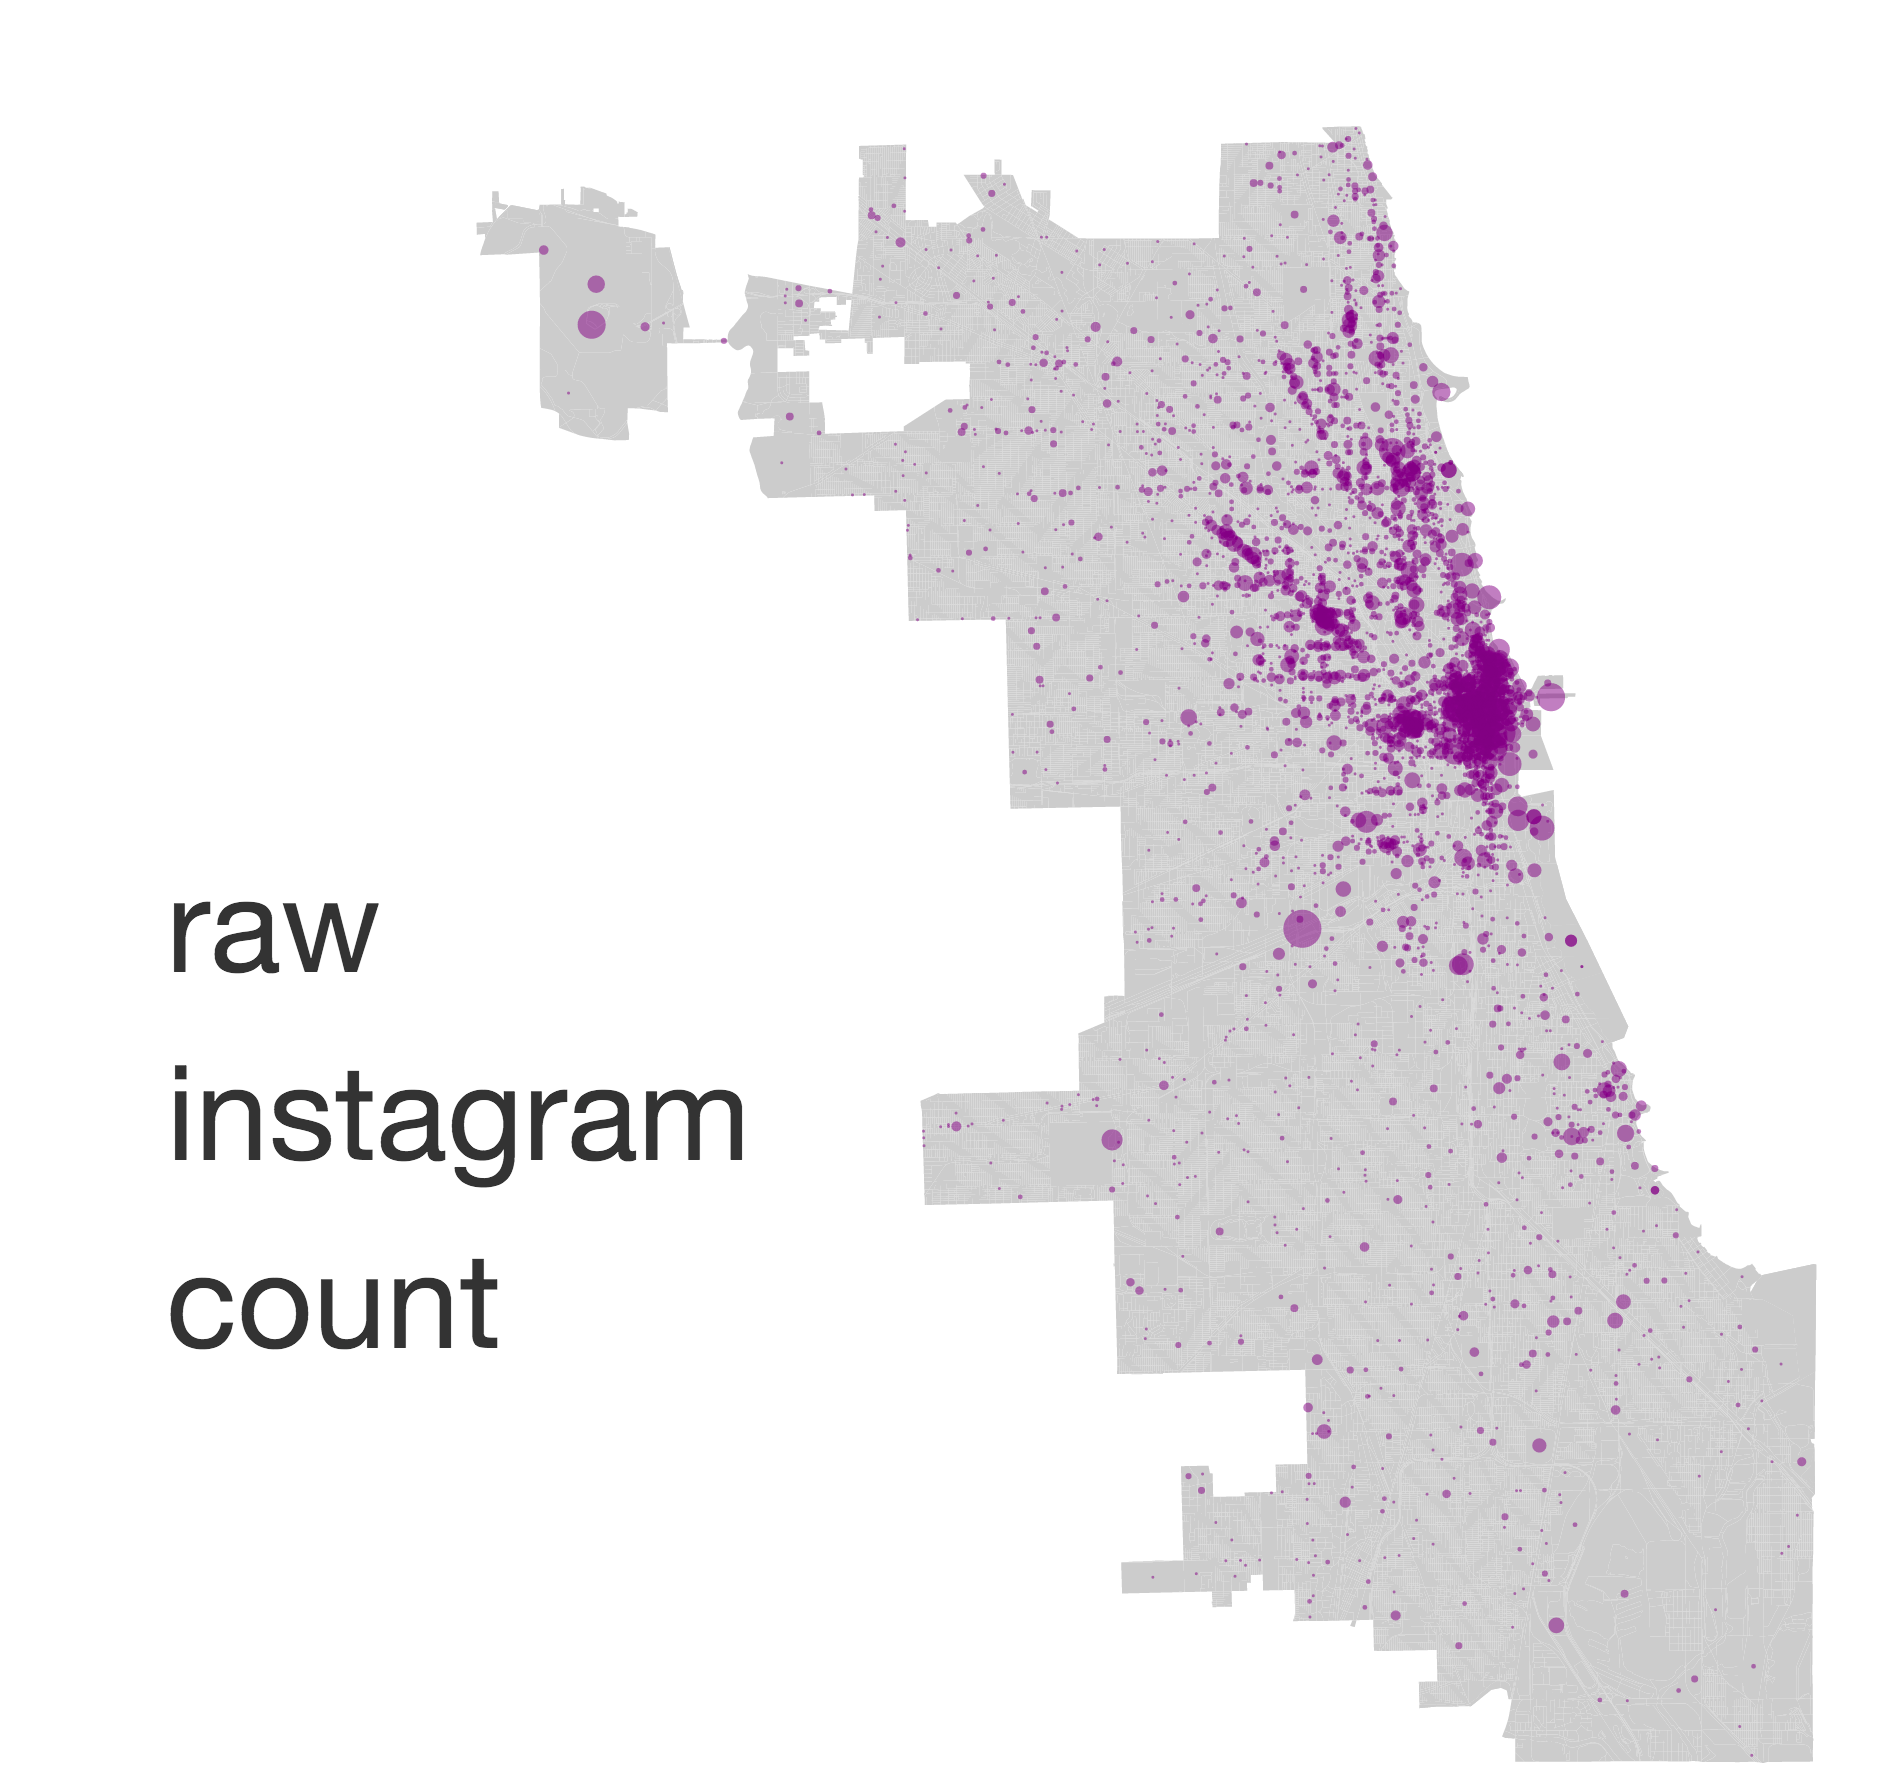 Chicago's Instagram Presence (Raw Count)